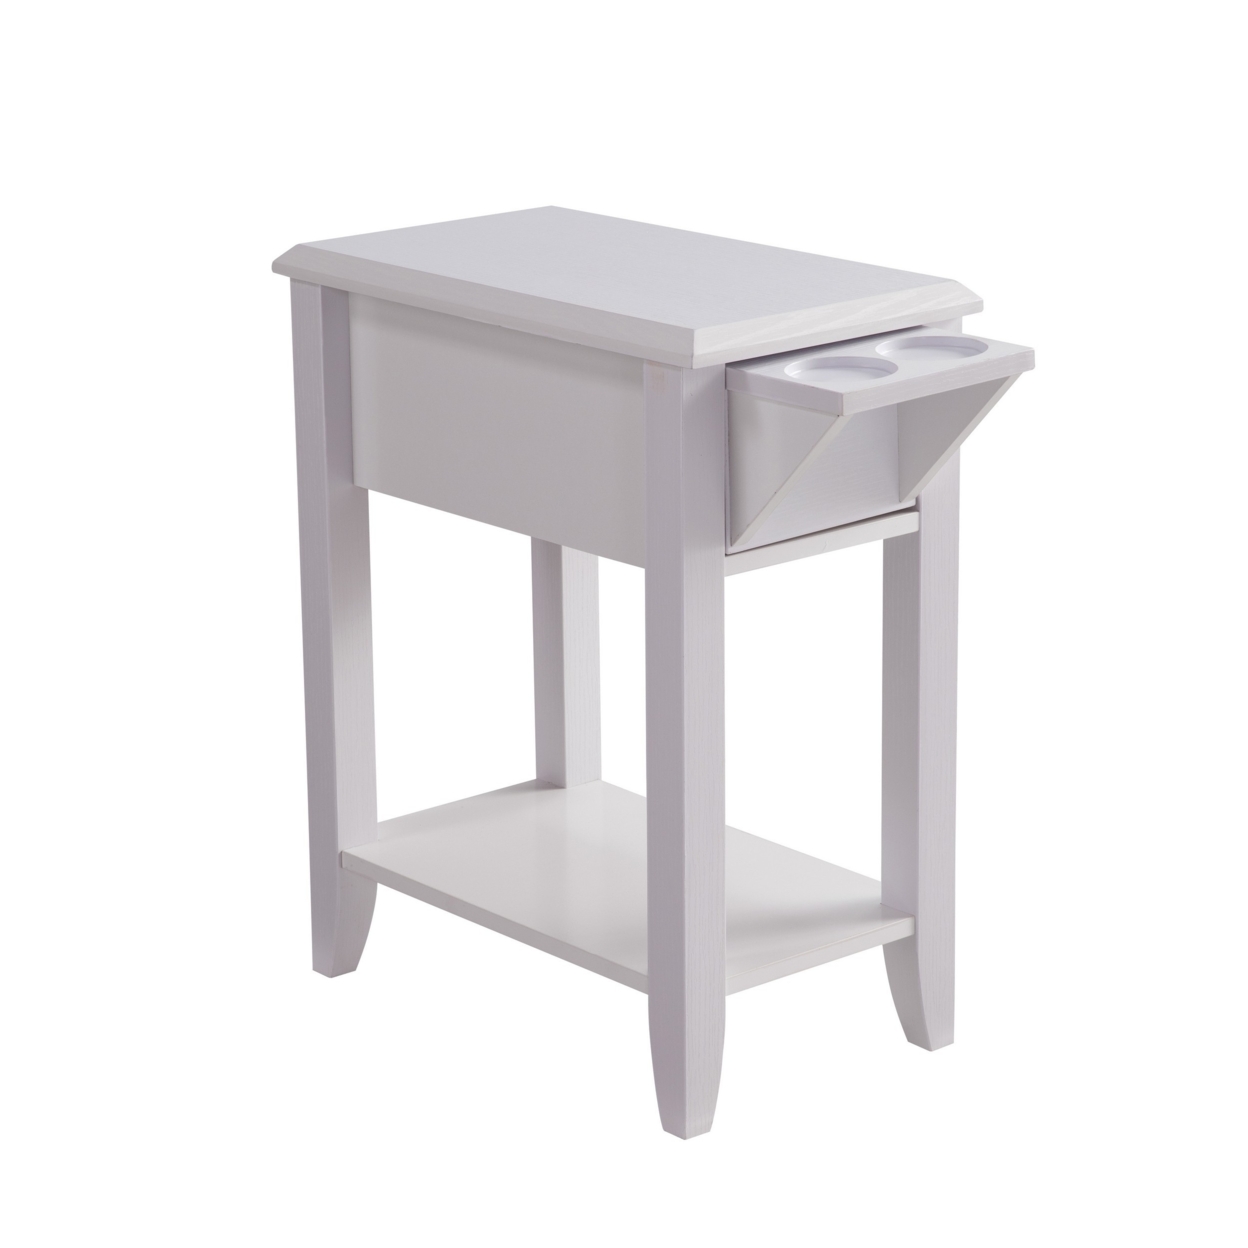 24 Inch Modern Chairside Table With Extendable Drawer And Cupholders, White- Saltoro Sherpi